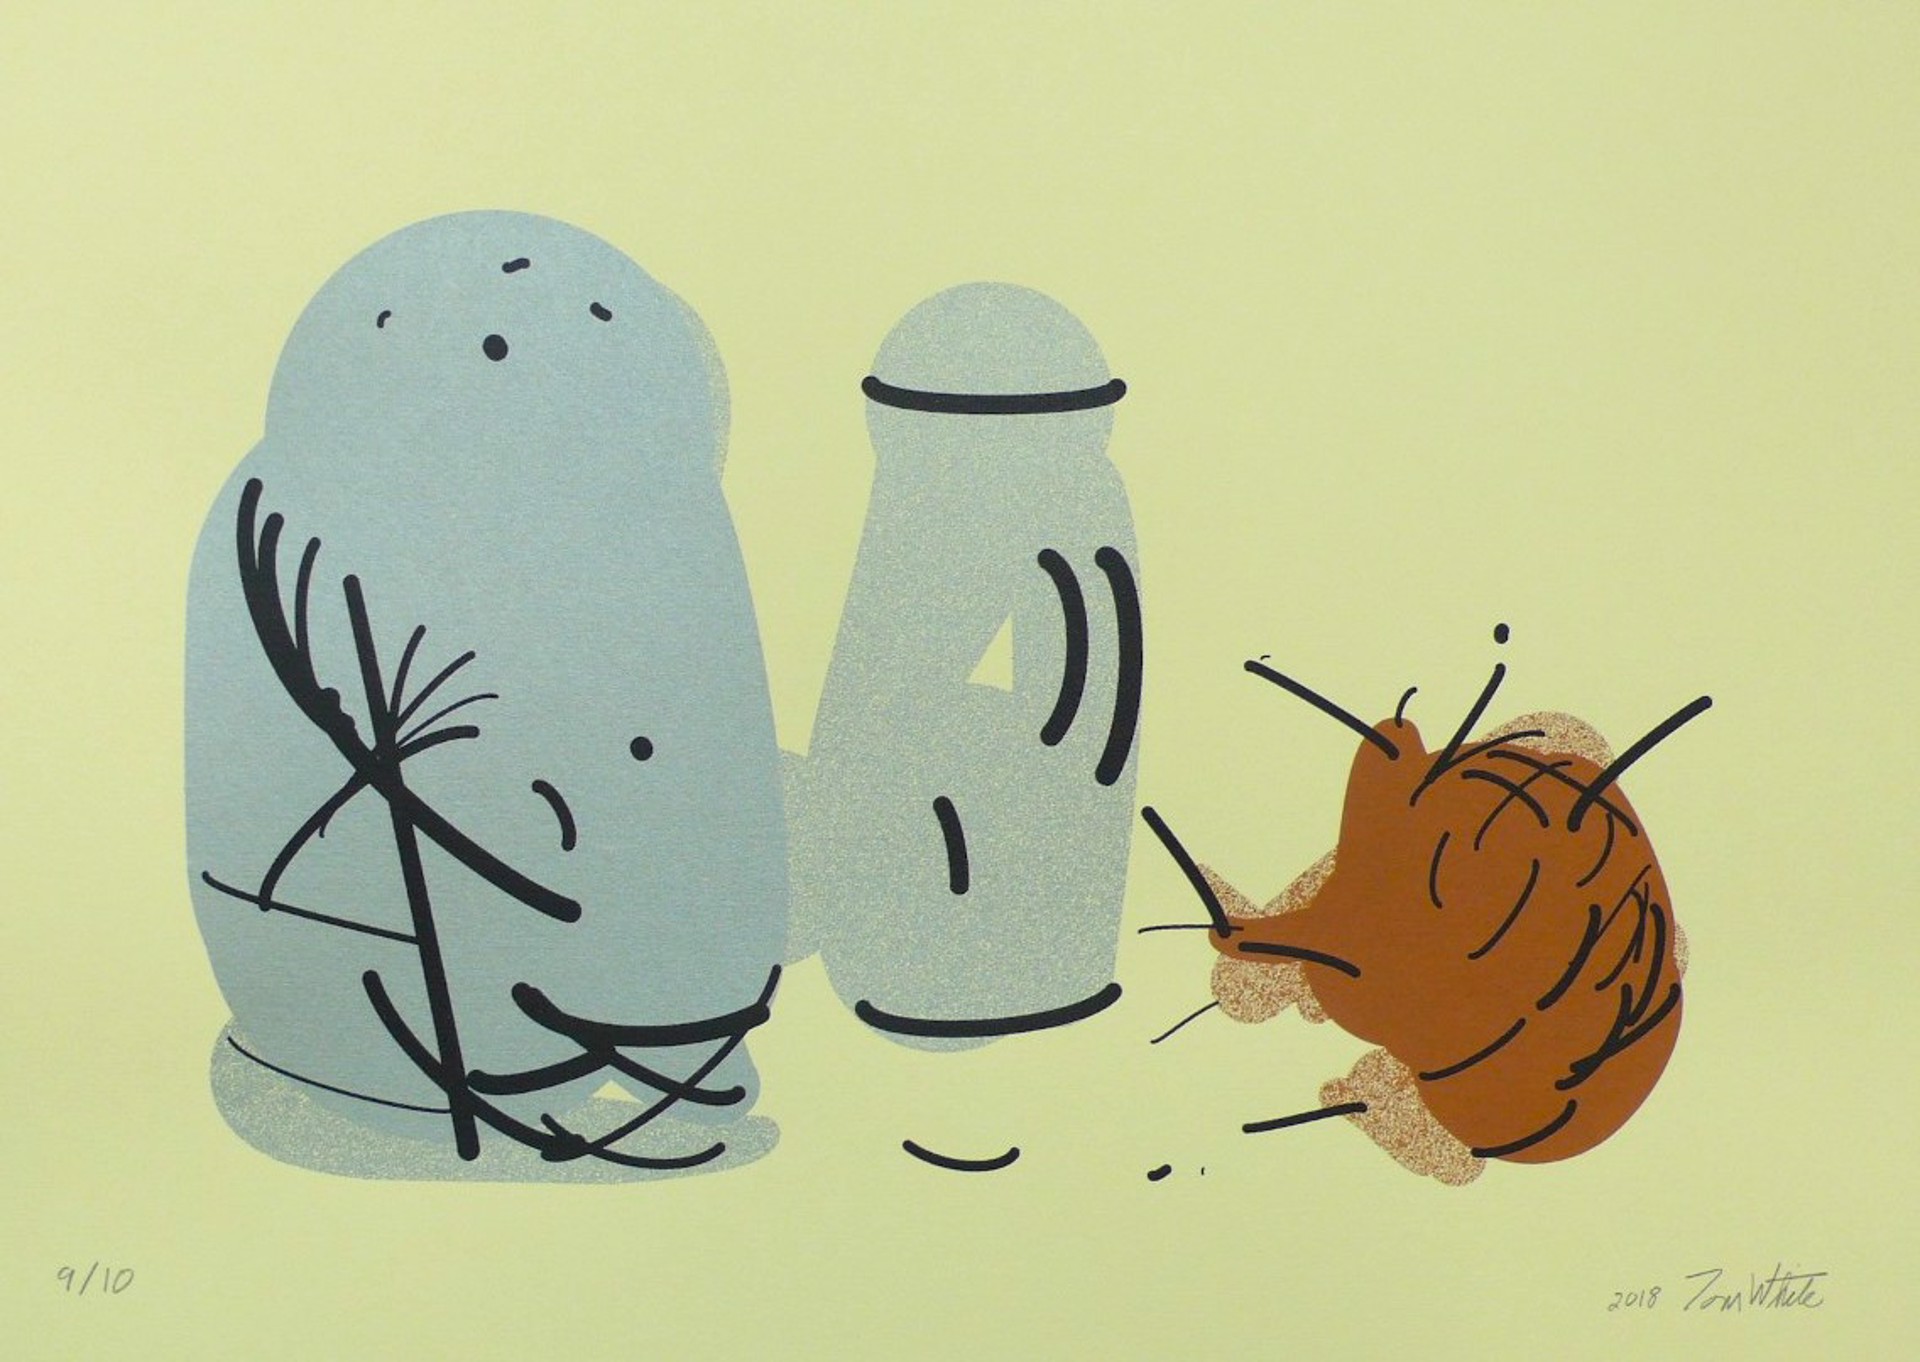 Saltshaker and Snail by Tom White